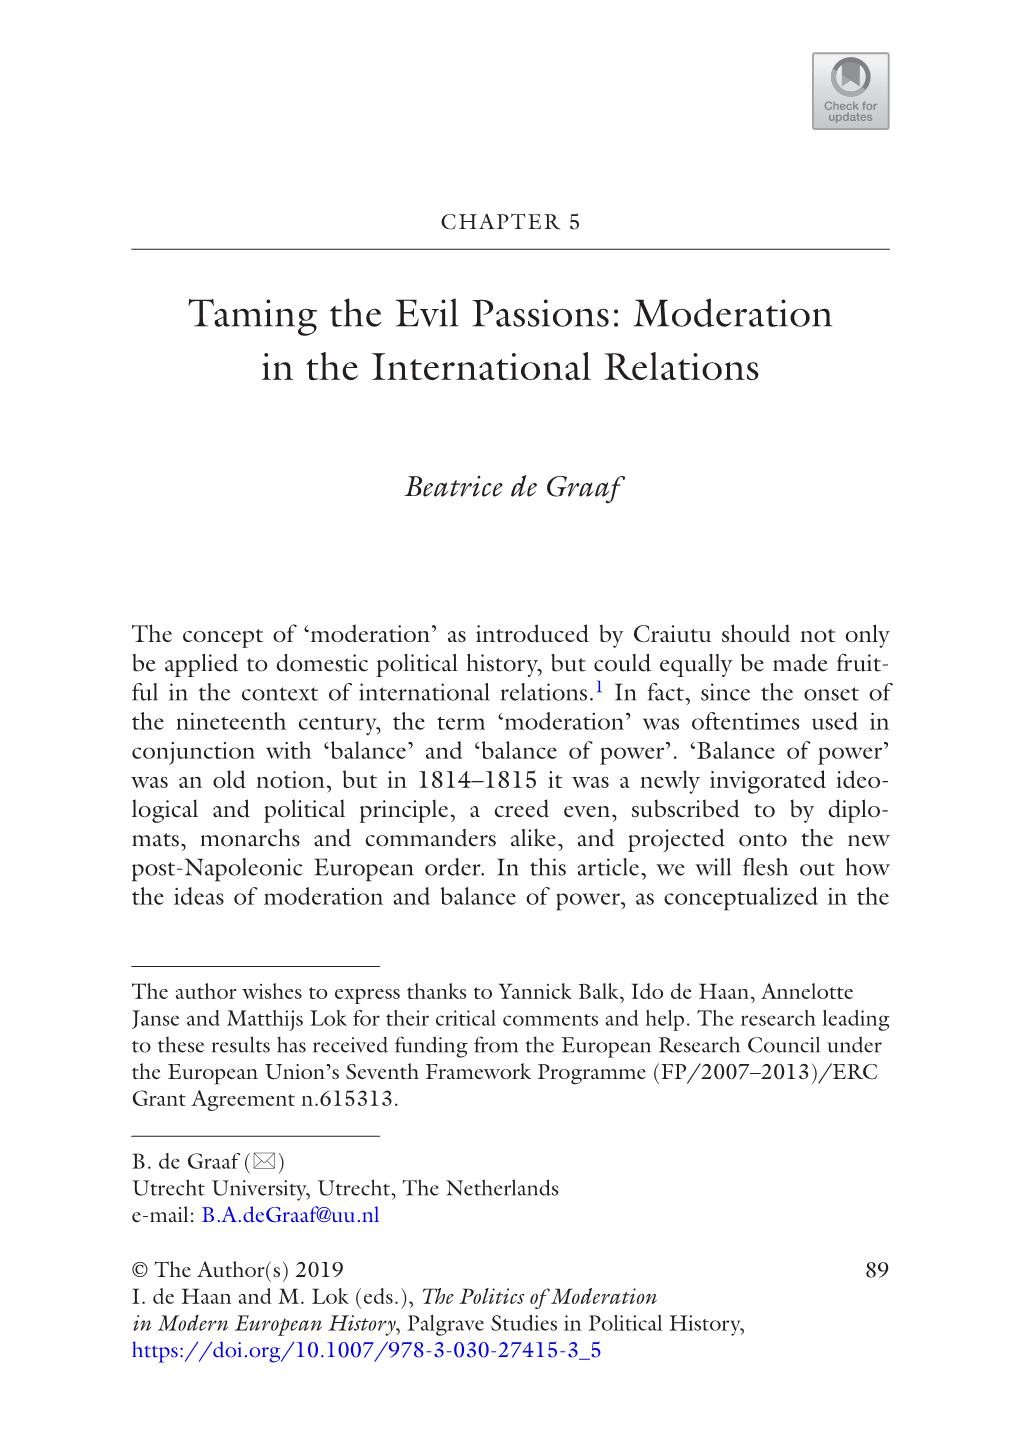 Taming the Evil Passions: Moderation in the International Relations